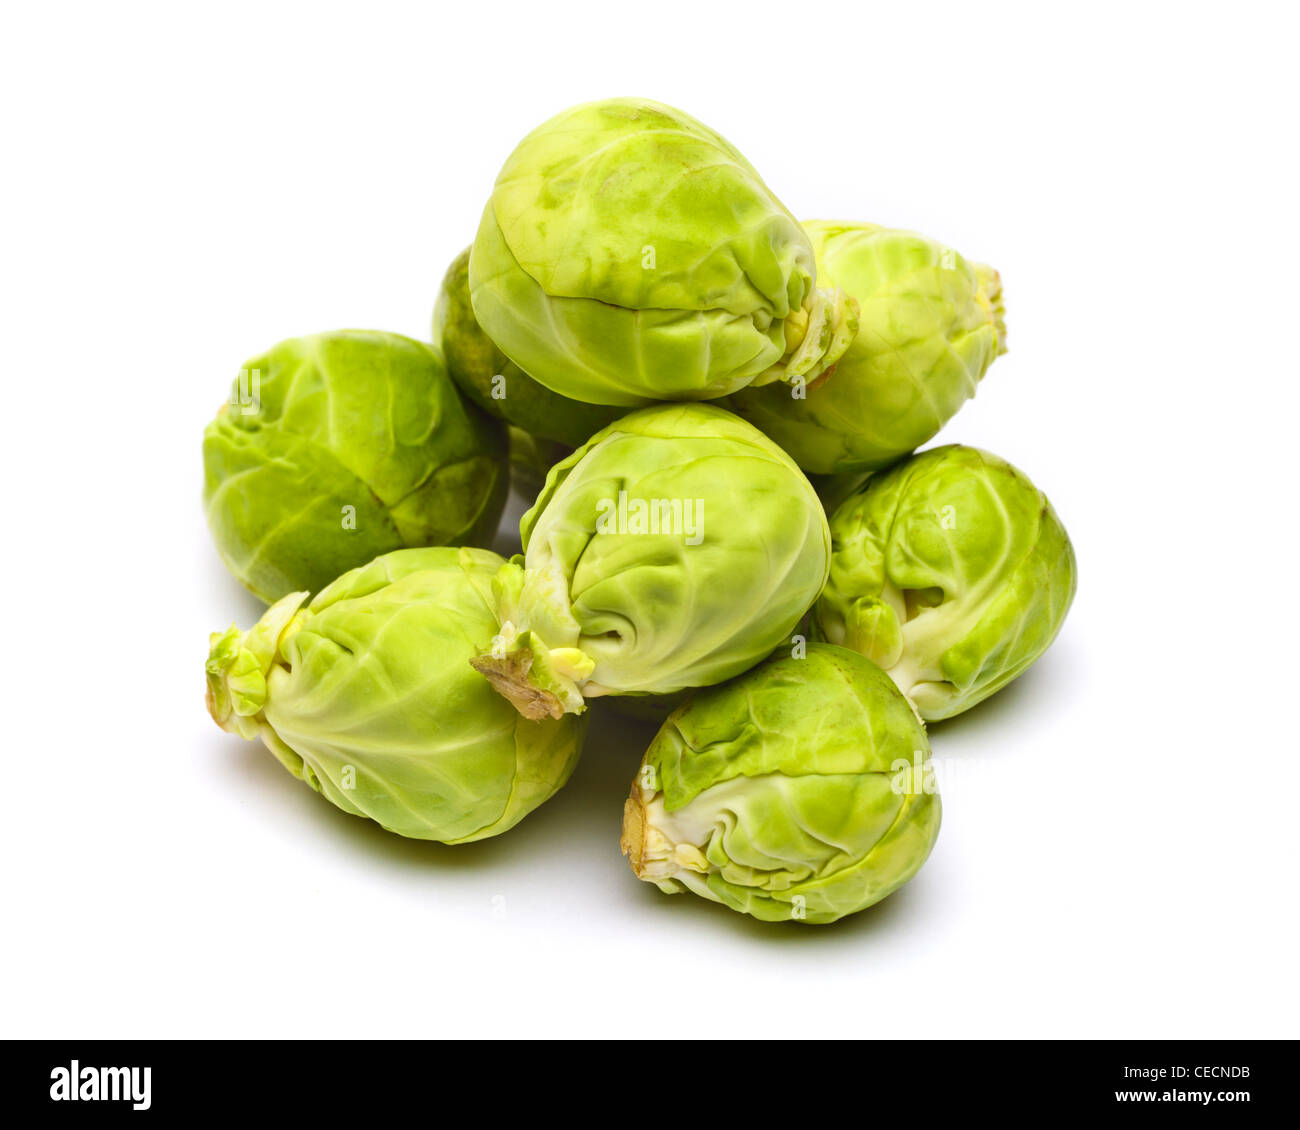 Uncooked, raw sprouts on white background Stock Photo